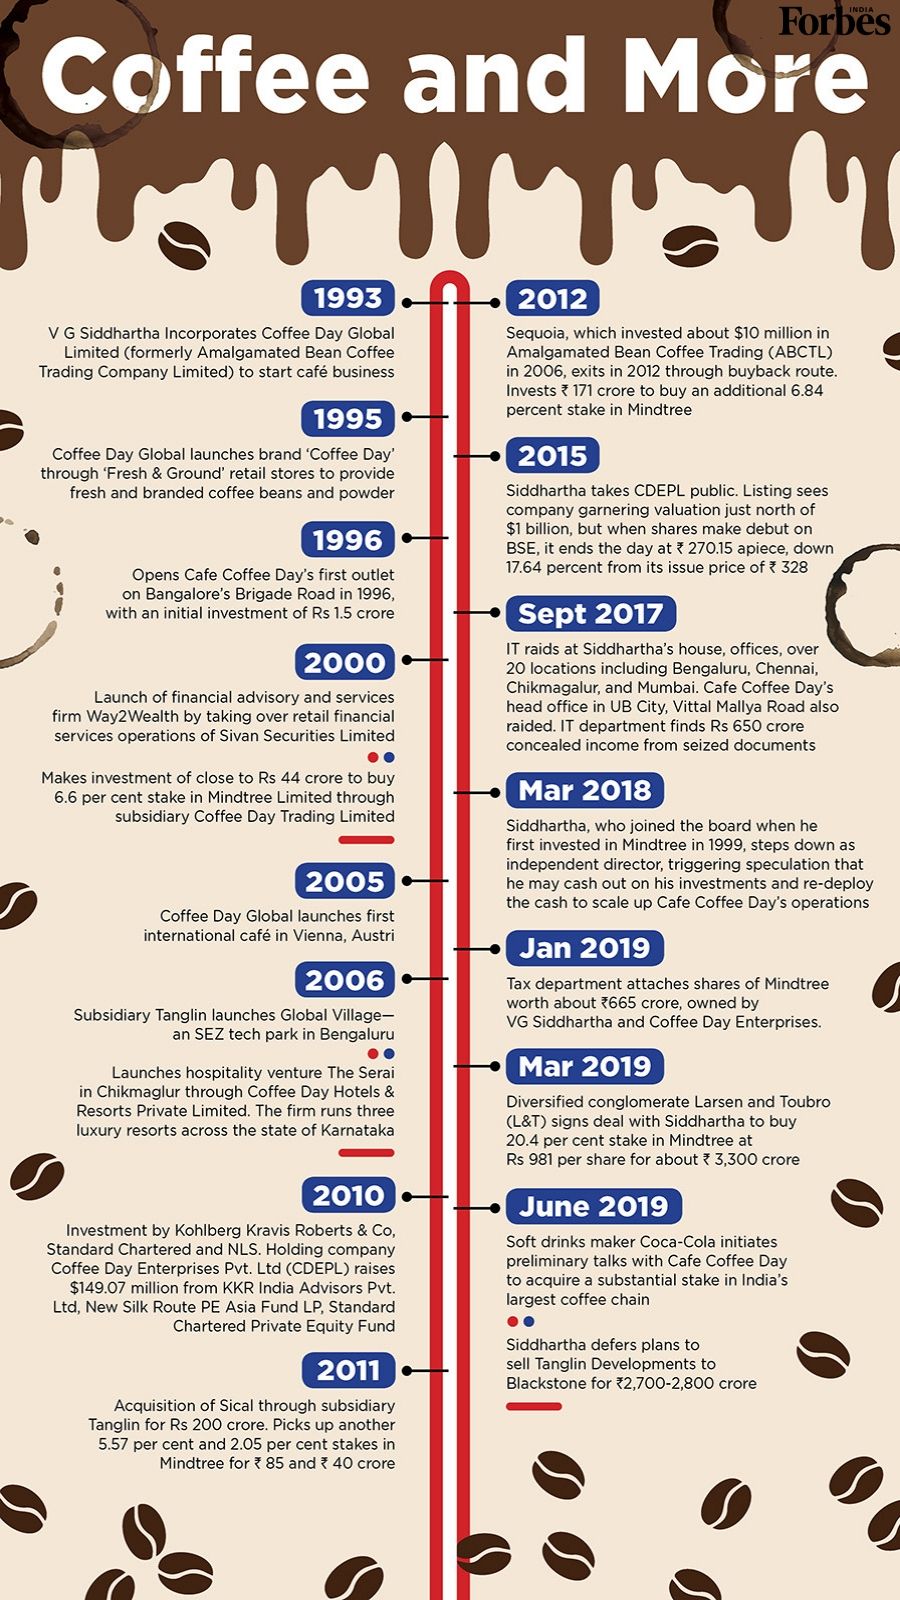 VG Siddhartha and Cafe Coffee Day: A timeline of highlights